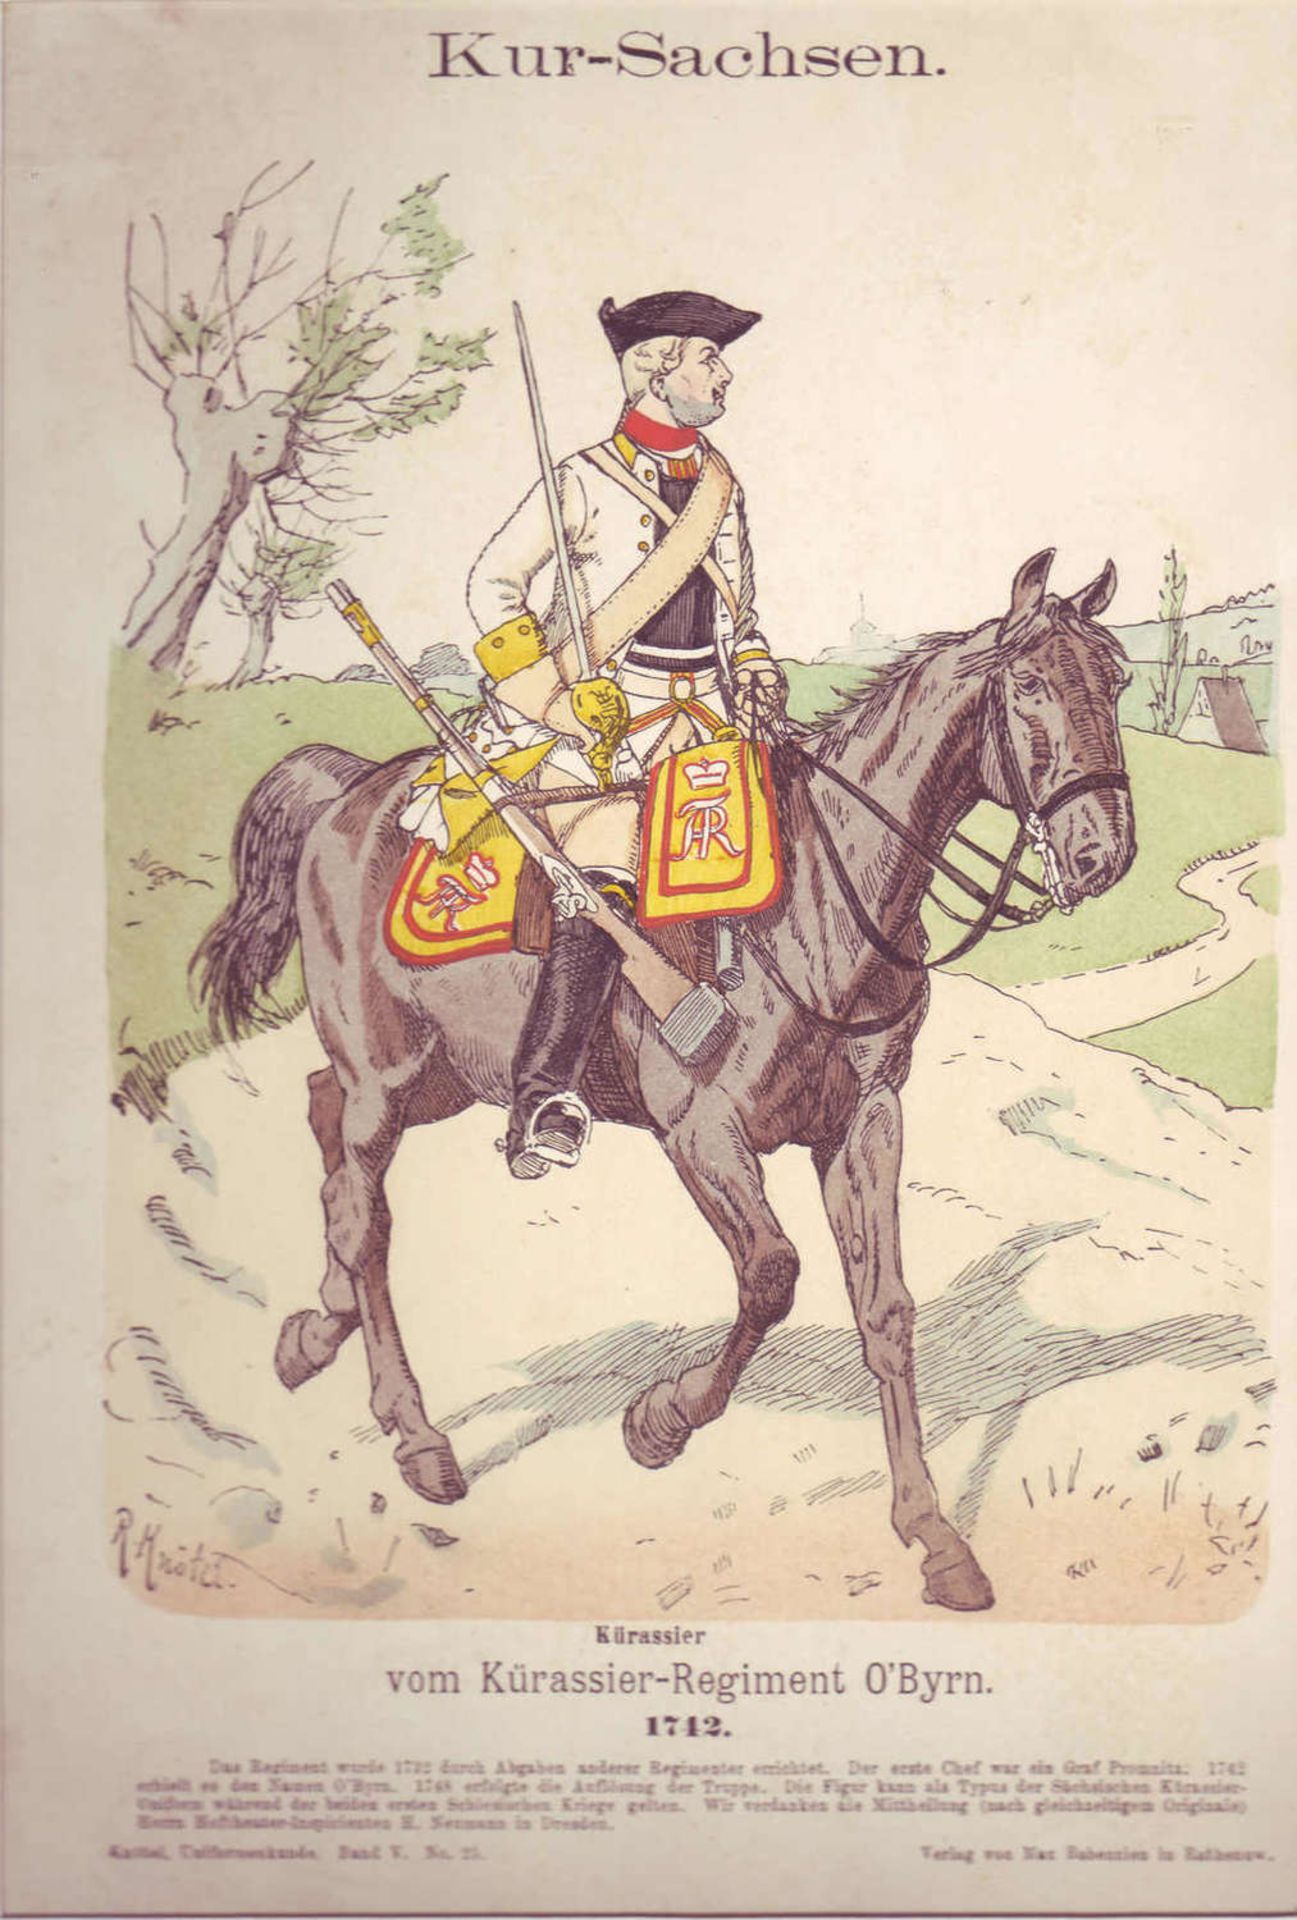 Kur-Sachsen, three copies of soldier paintings from the 18th century: cuirassier, hussar, officer